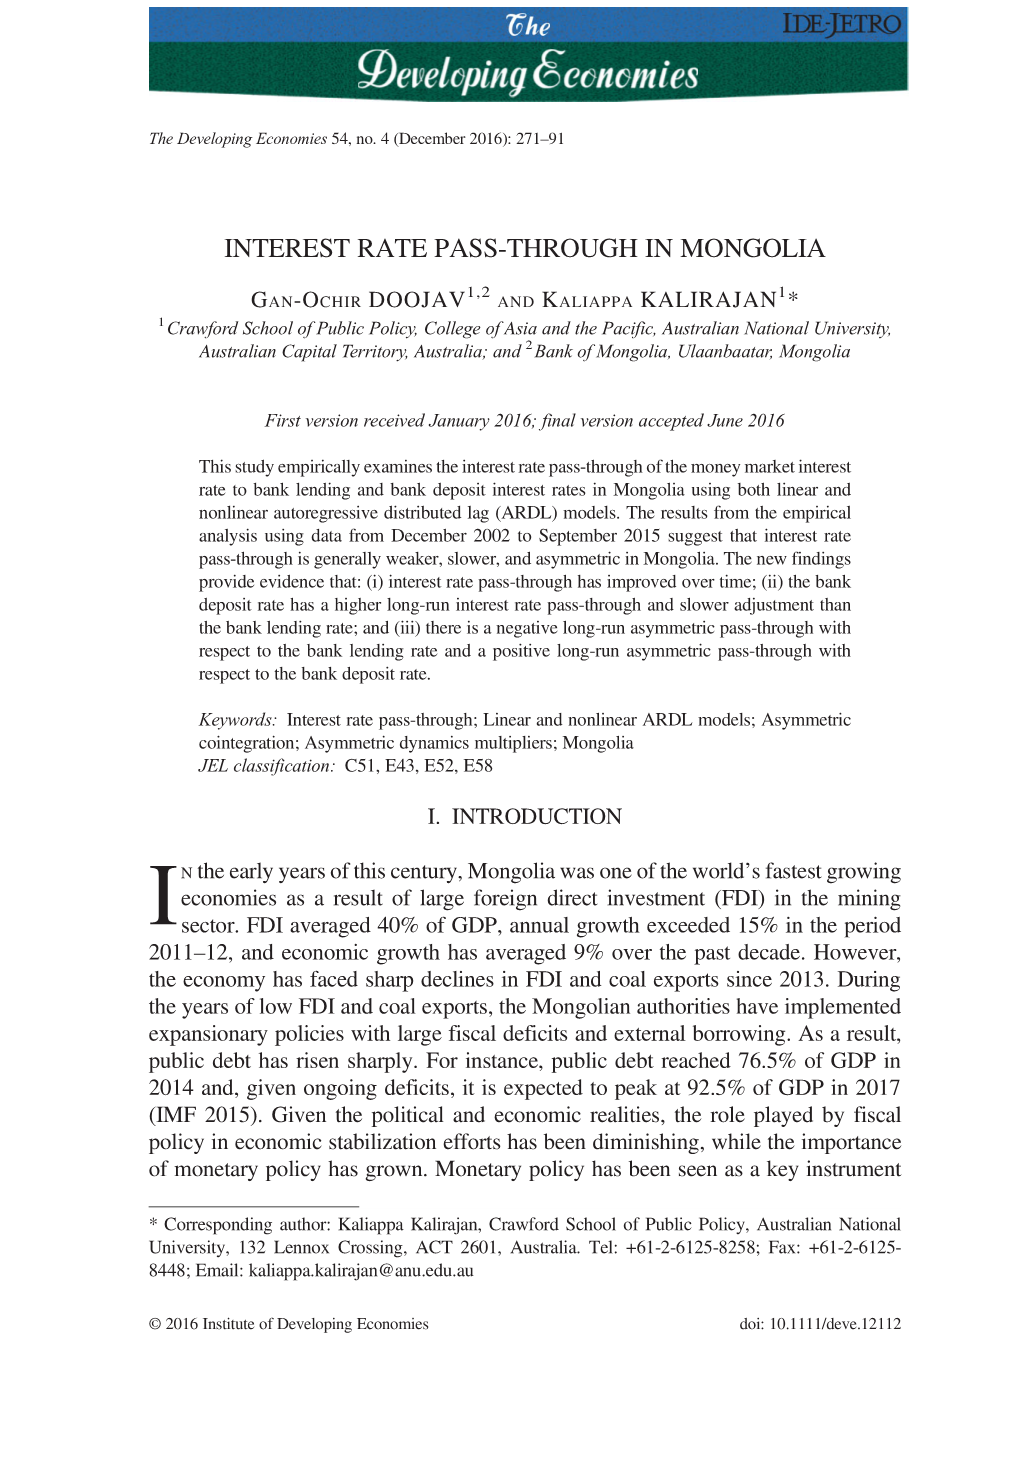 Interest Rate Pass-Through in Mongolia